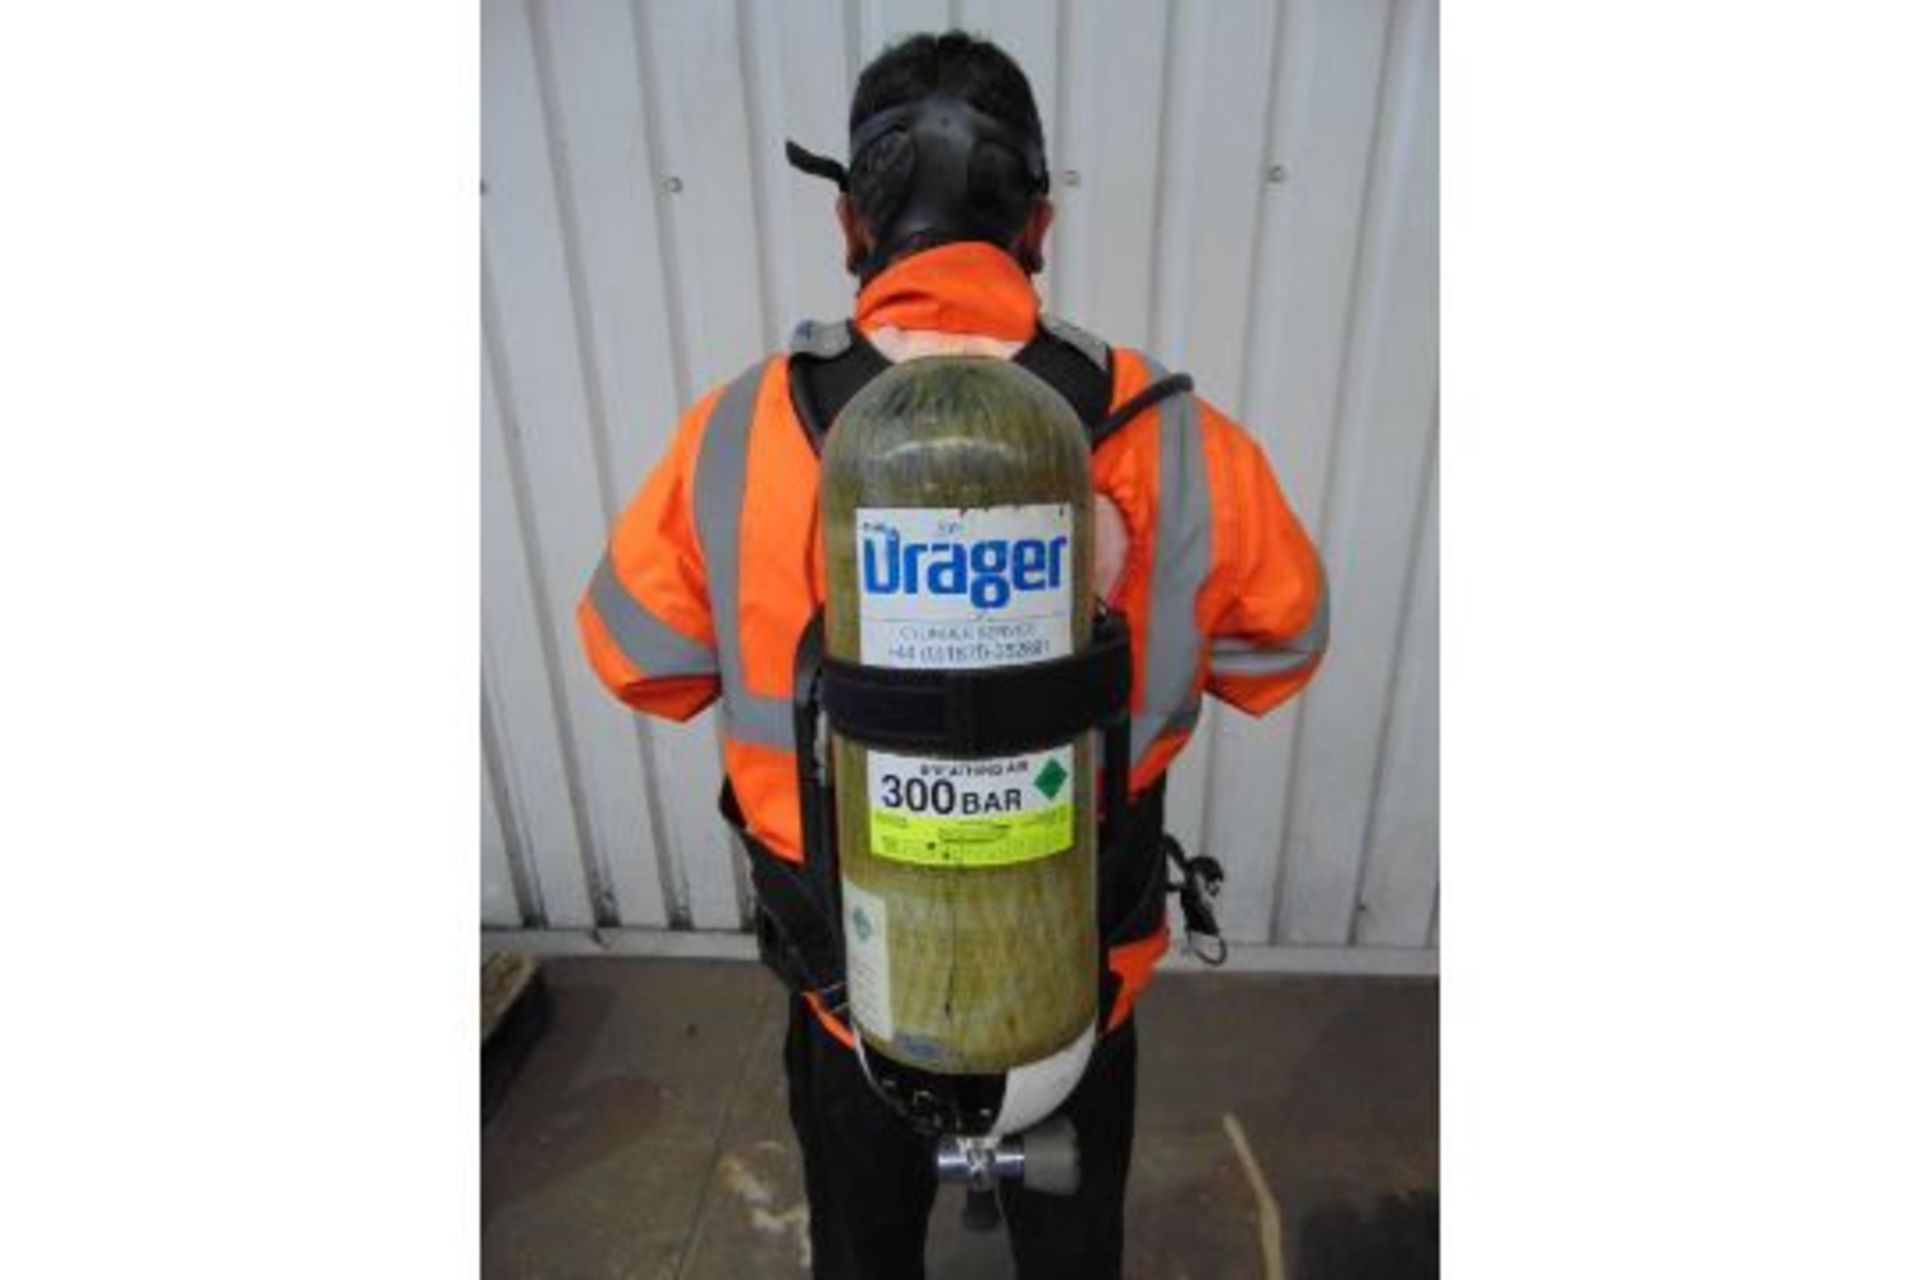 Drager PSS 7000 Self Contained Breathing Apparatus w/ 2 x Drager 300 Bar Air Cylinders - Image 15 of 23